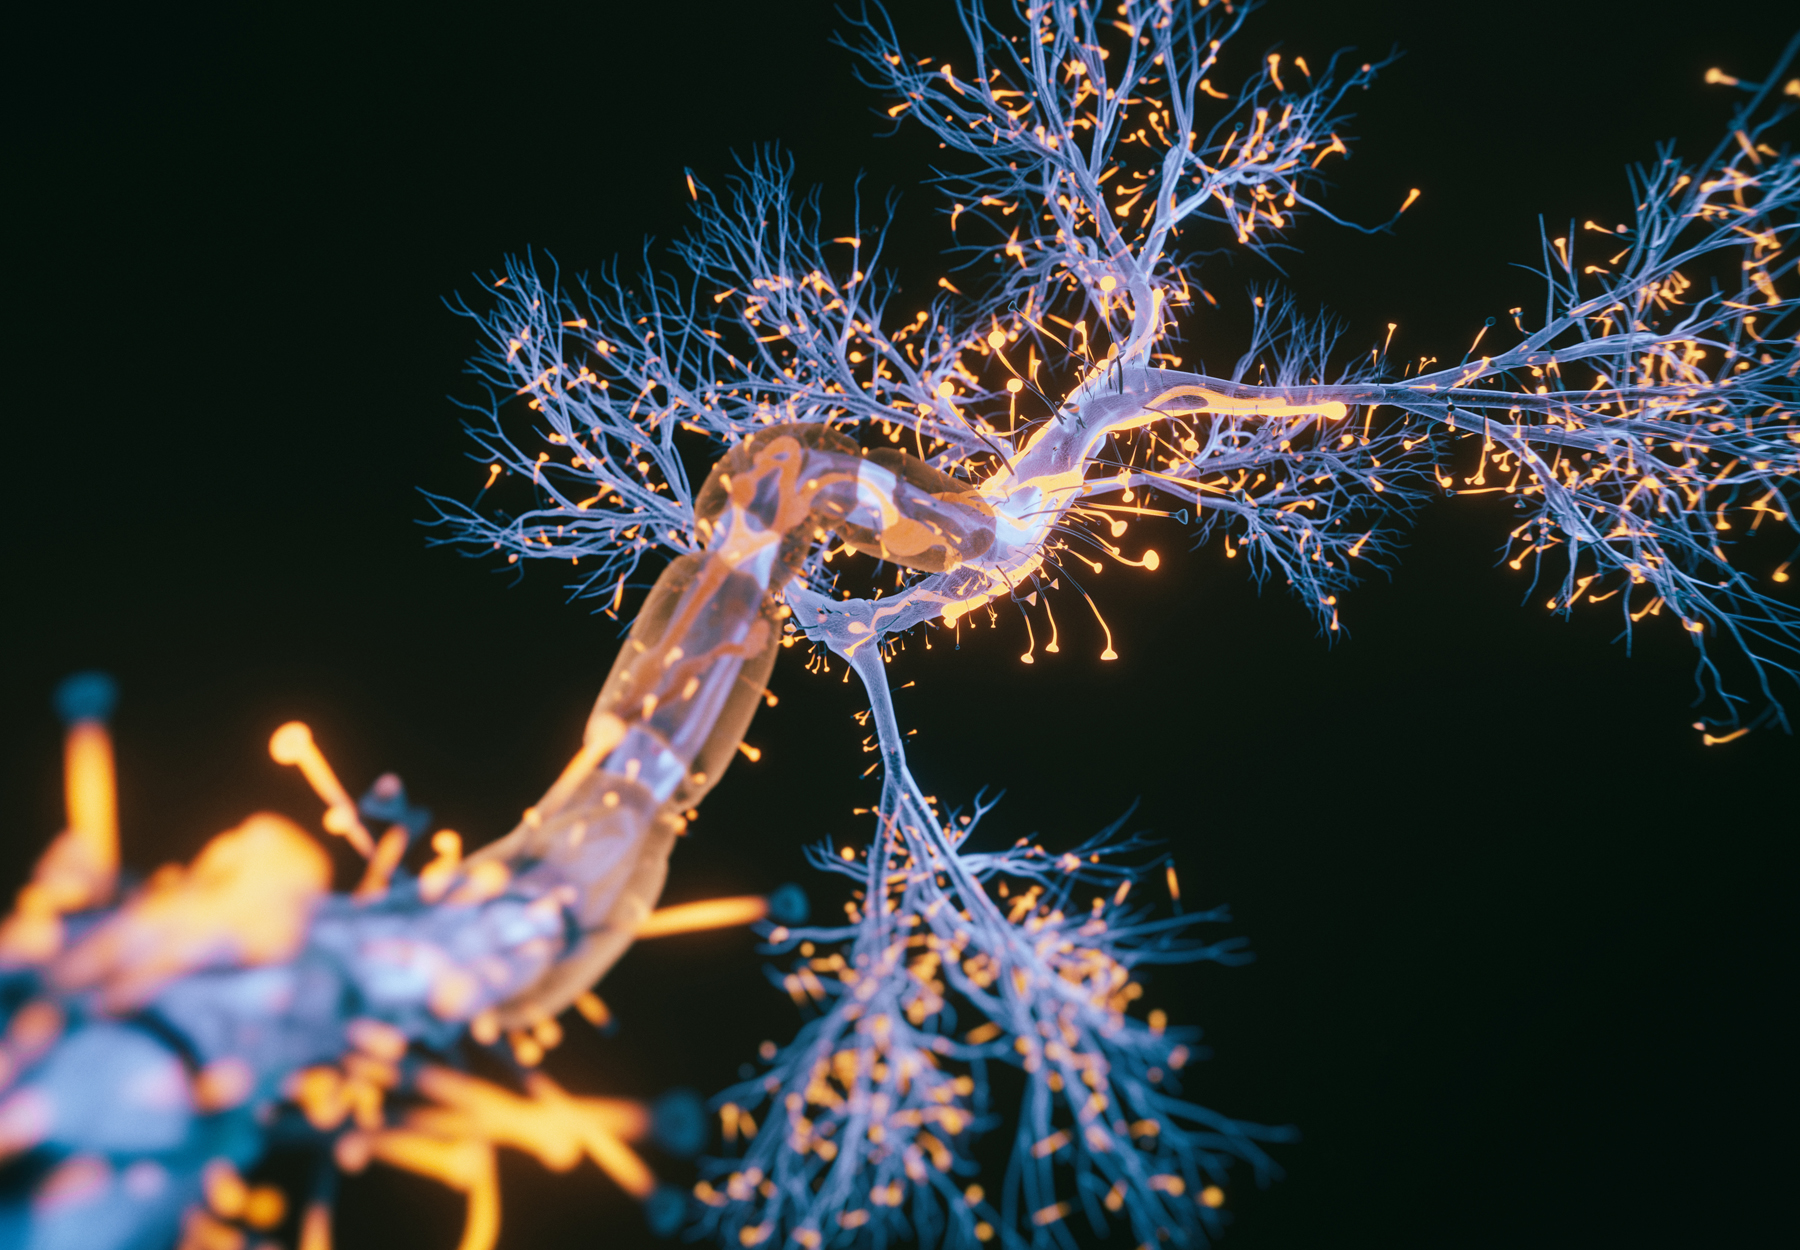 Computer-generated image of neuron in orange and blue on black background. Stock image.